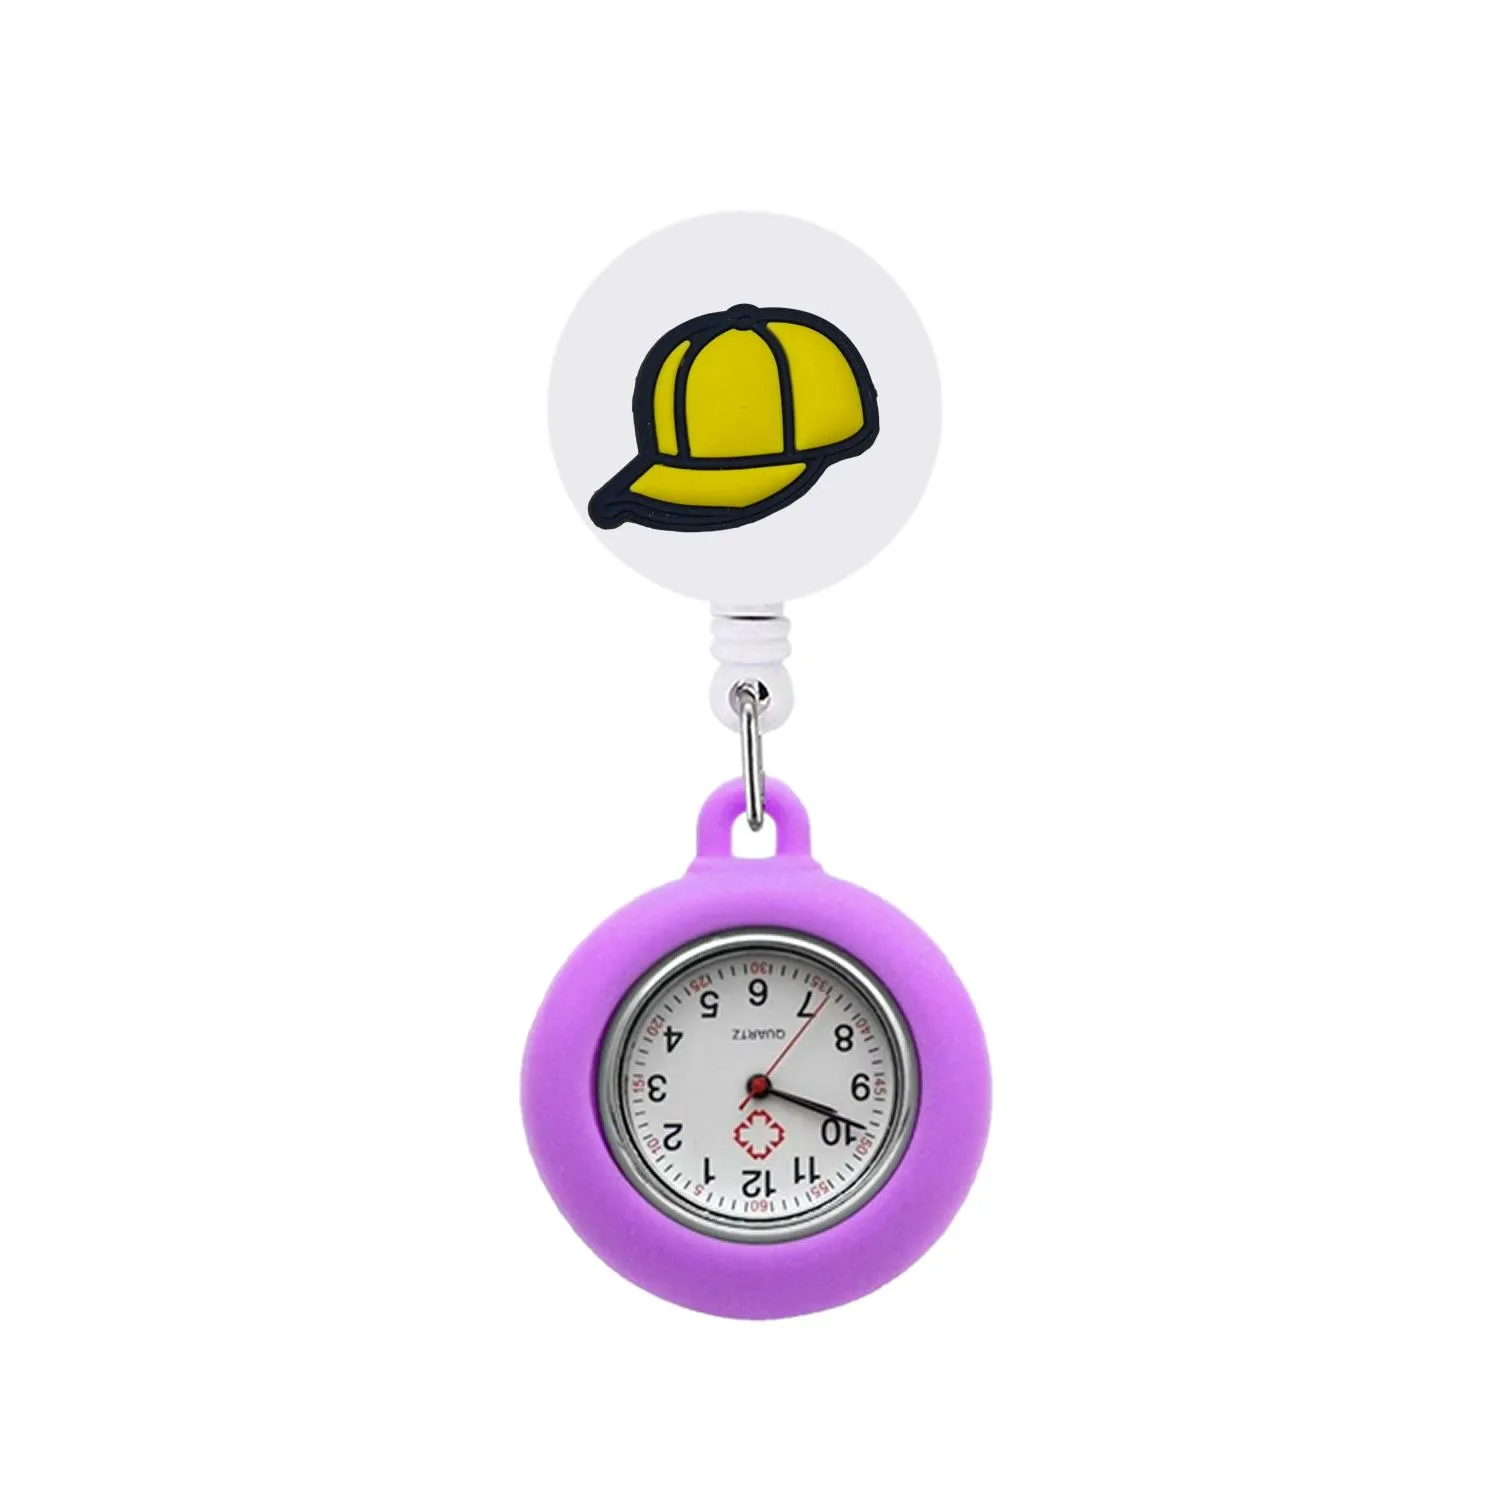 hat clip pocket watches silicone lapel nurse watch with second hand brooch fob for medical workers on easy to read alligator hang clock gift